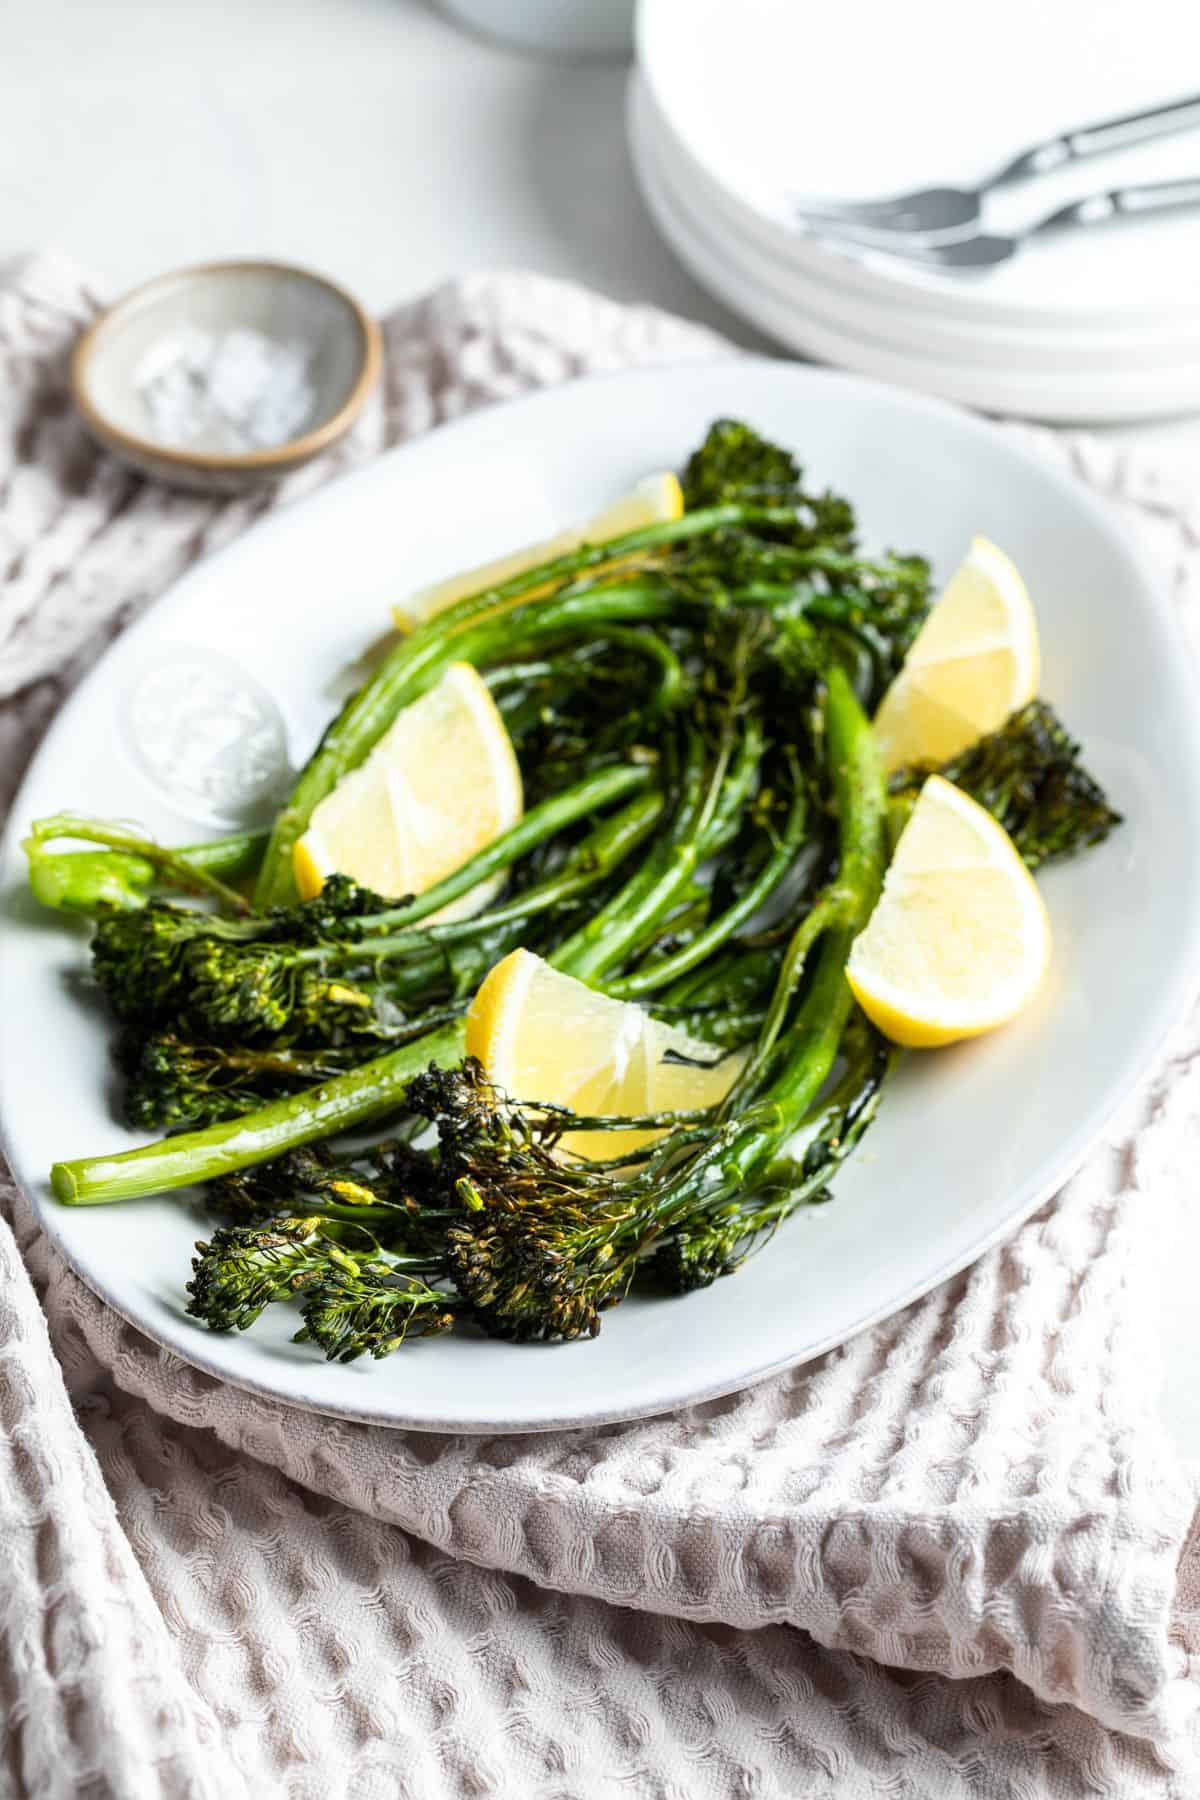 White dish with cooked broccolini garnished with lemon wedges.